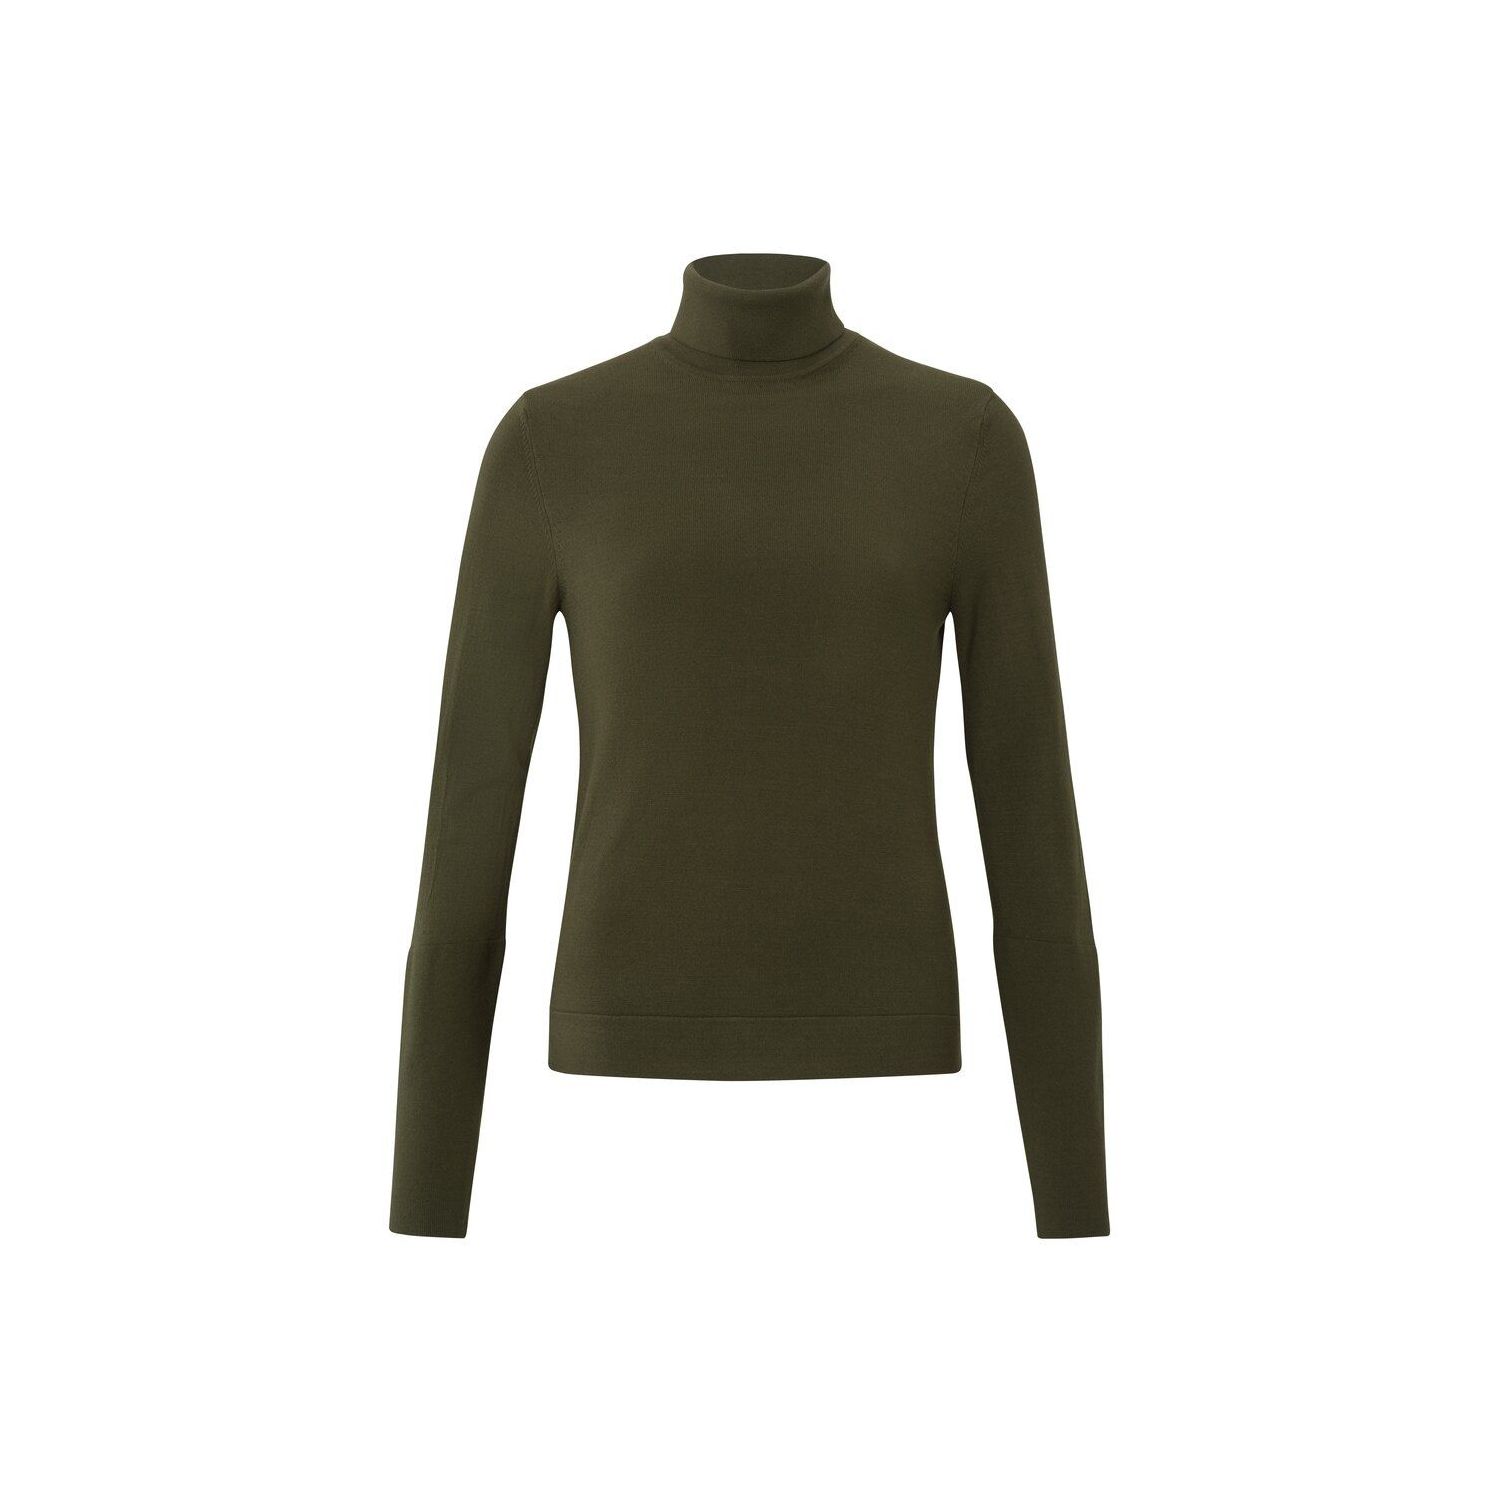 Yaya turtleneck sweater with button army green